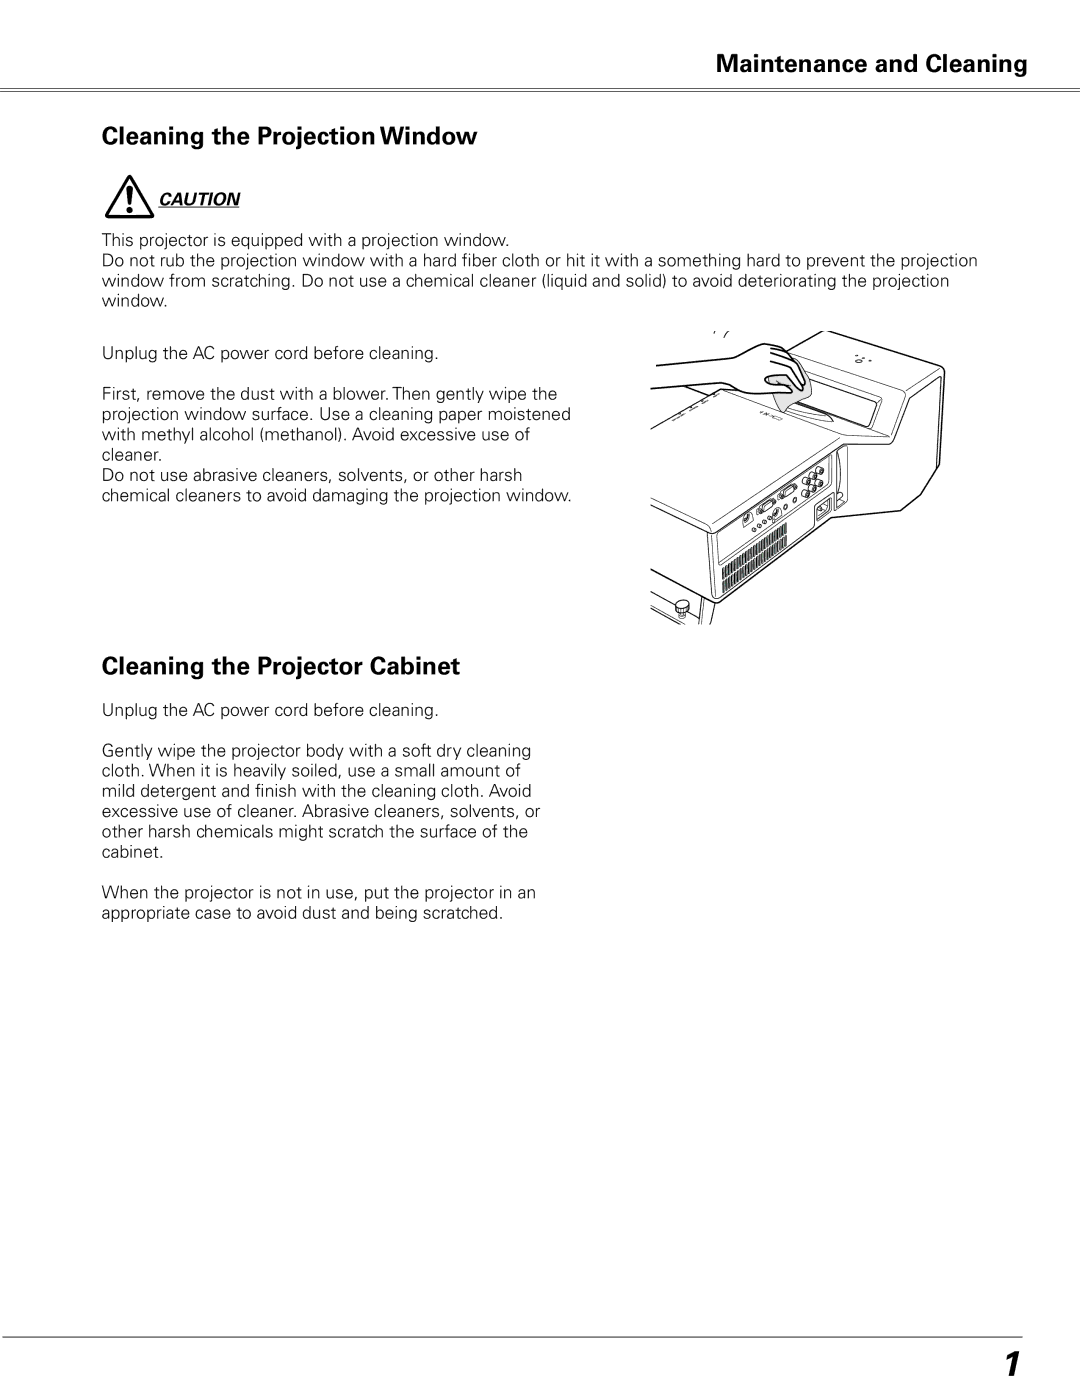 Sanyo PLC-XL50 owner manual Maintenance and Cleaning Cleaning the Projection Window, Cleaning the Projector Cabinet 